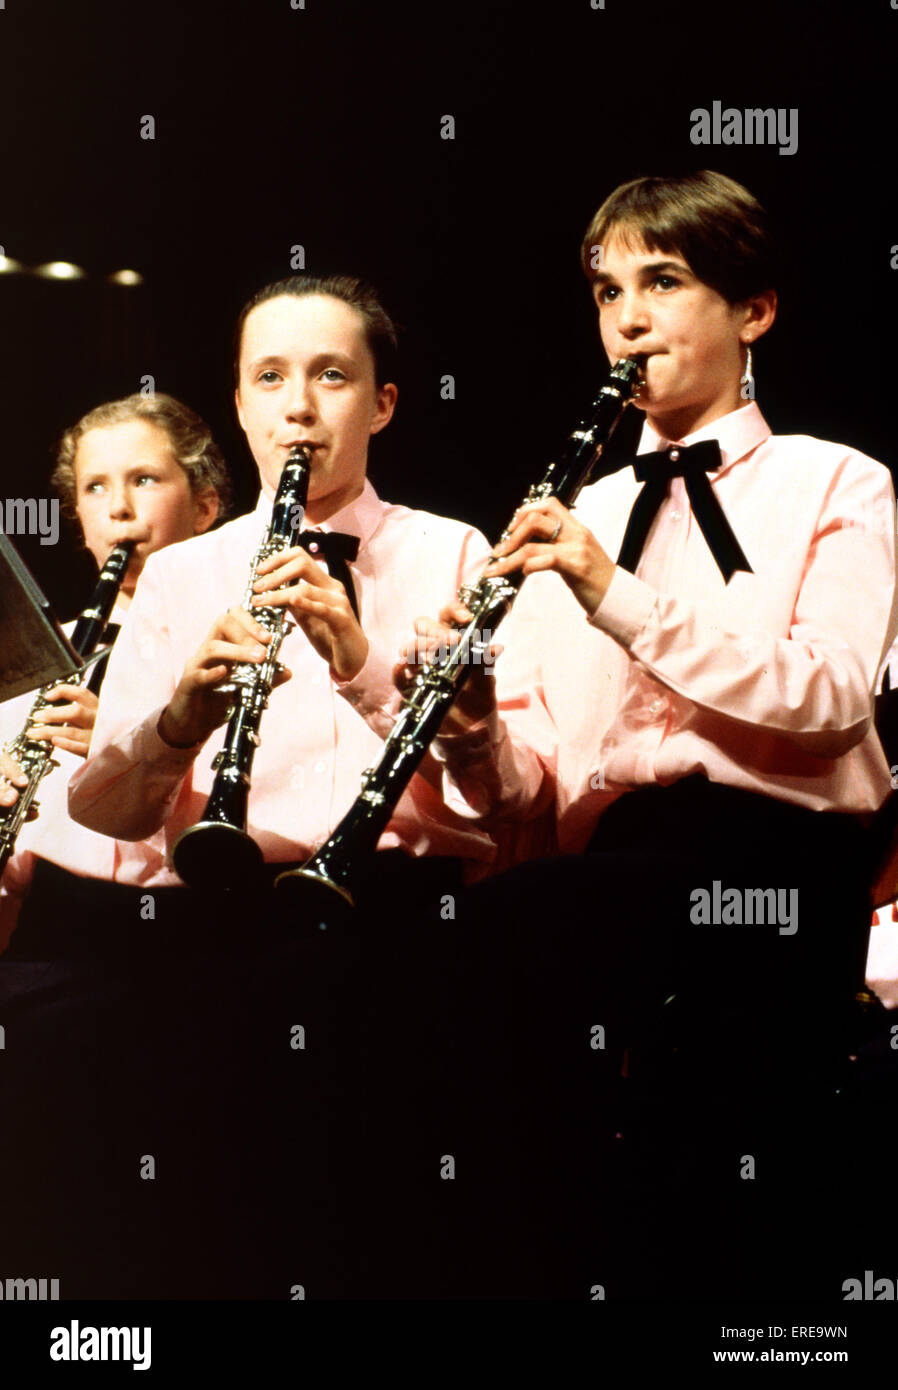 Boys playing clarinet in youth orchestra all wearing same shirts. Stock Photo